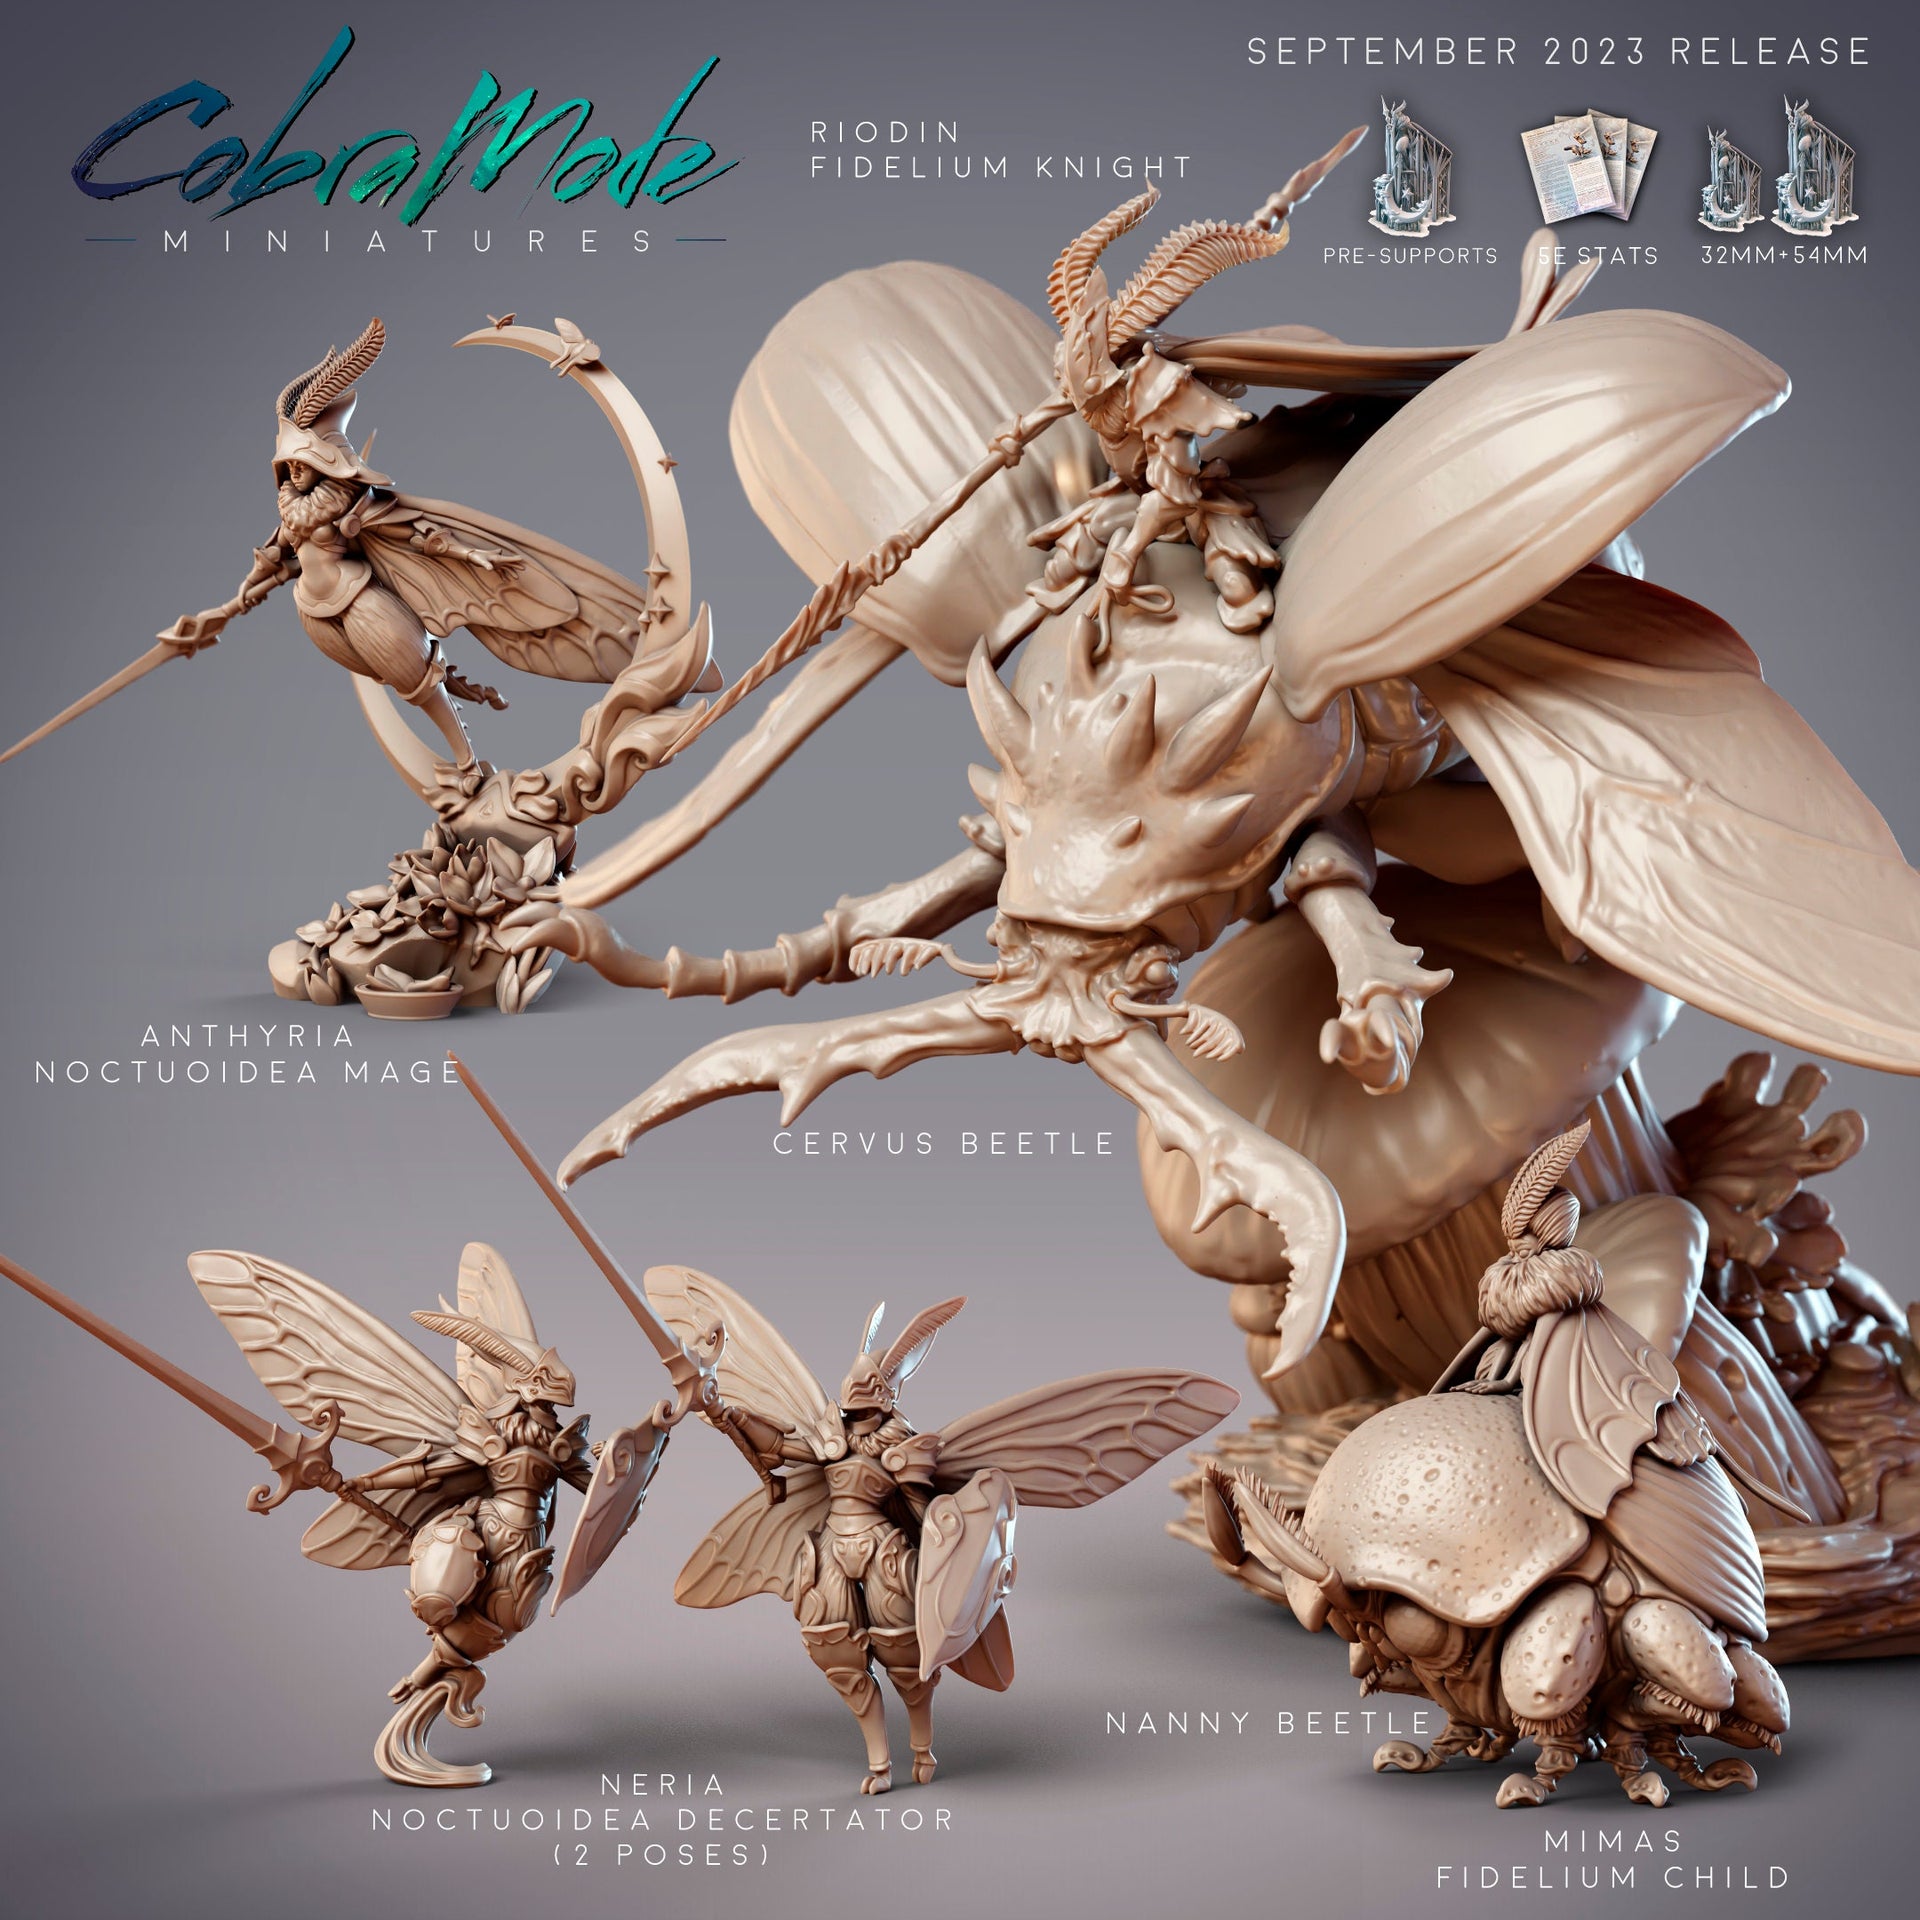 Fidelium Child Mimas and Beetle, Young Mothfolk - CobraMode | Miniature | Wargaming | Roleplaying Games | 32mm | 54mm